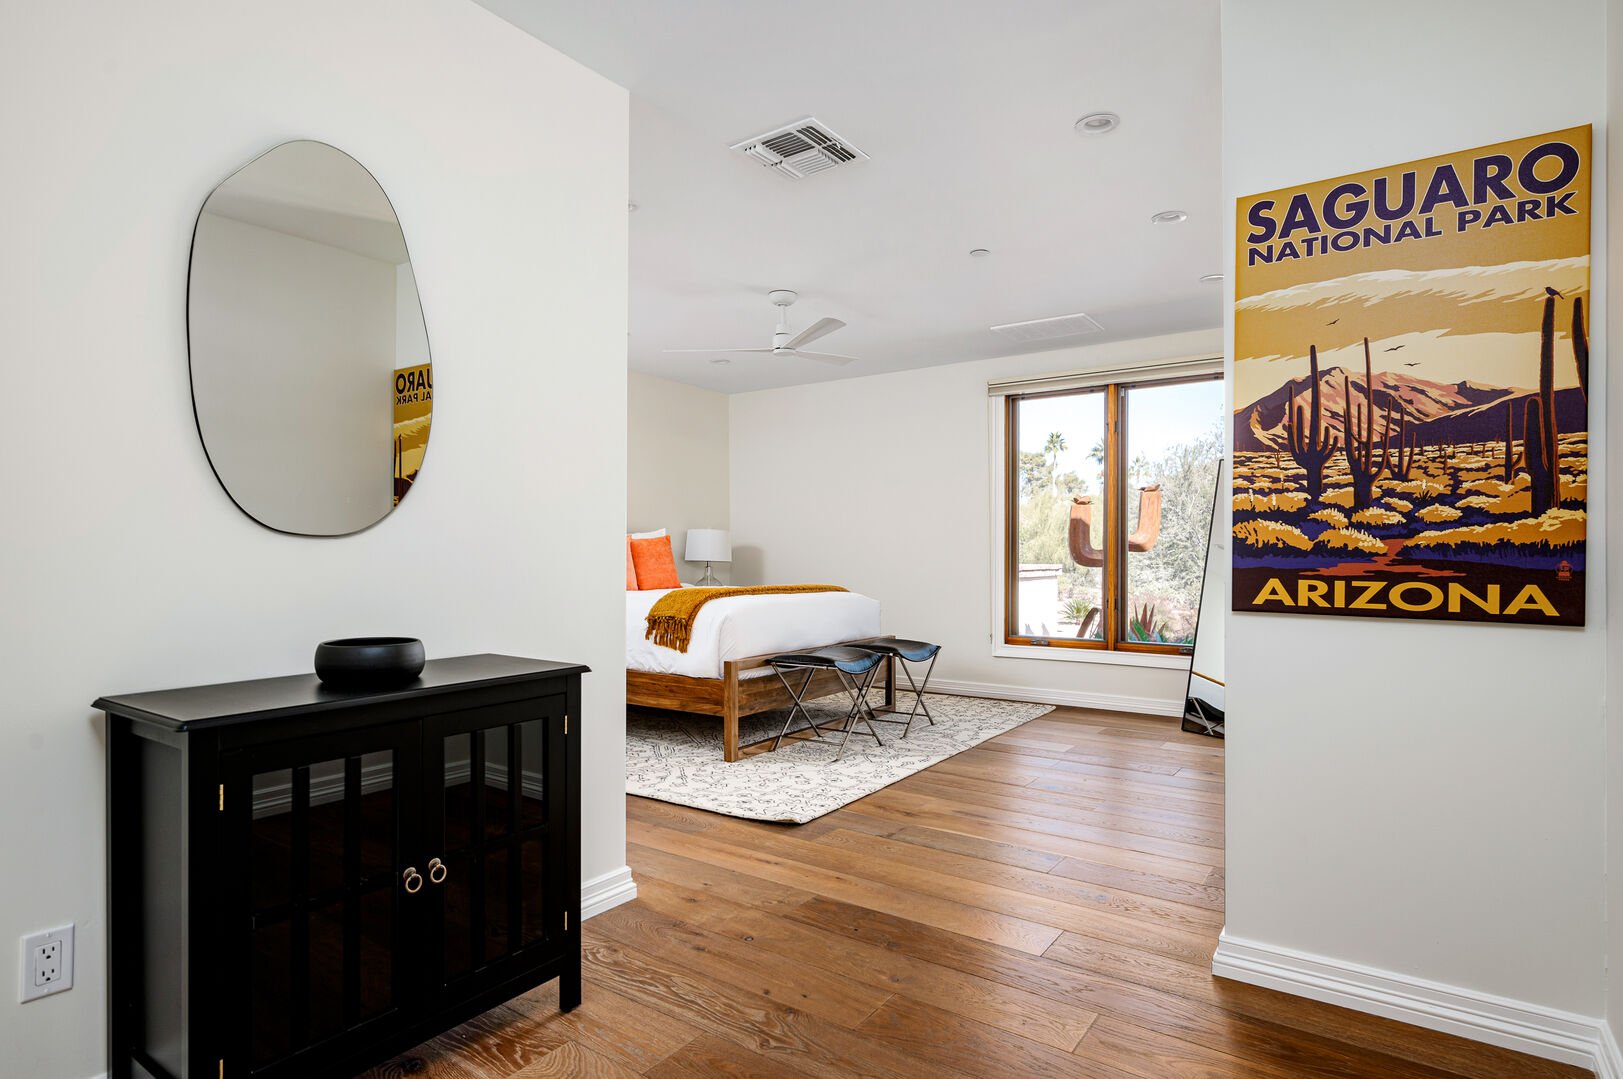 Queen sized bedroom that perfectly encapsulates the southwest image.